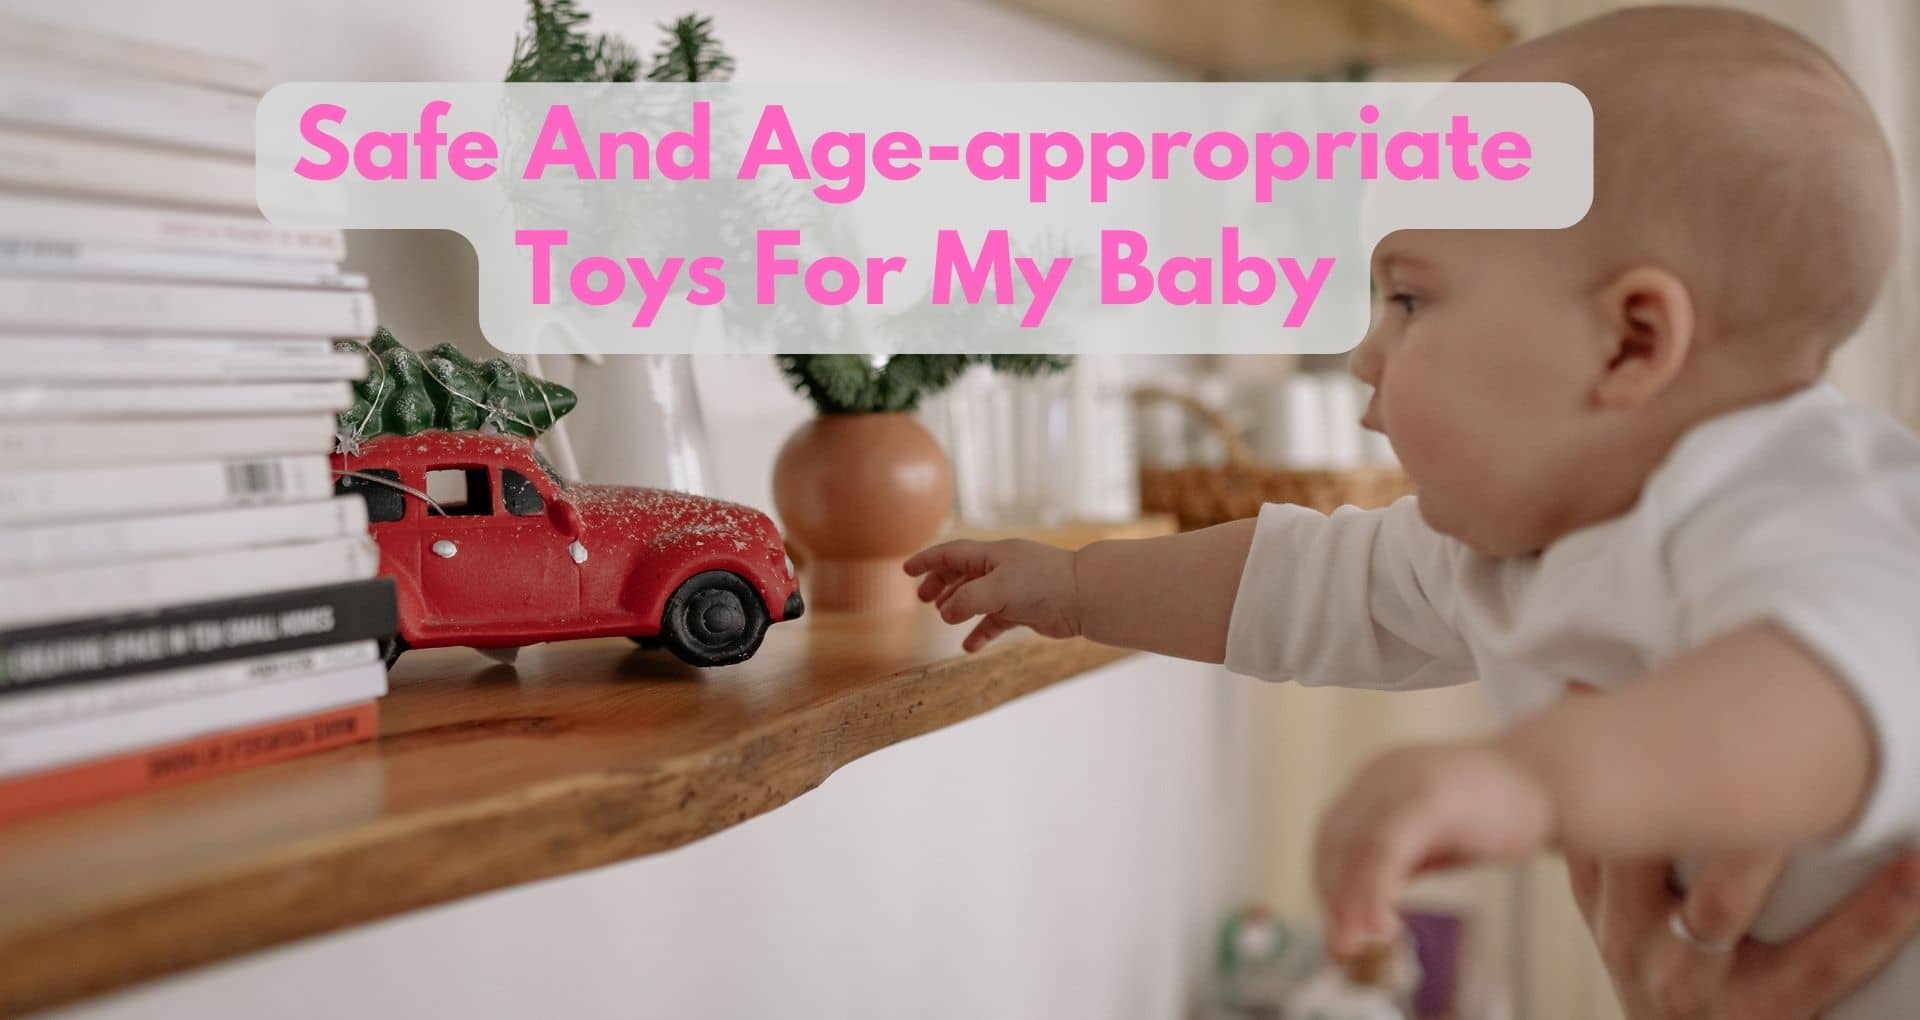 How To Choose Age Appropriate Toys For My Baby?